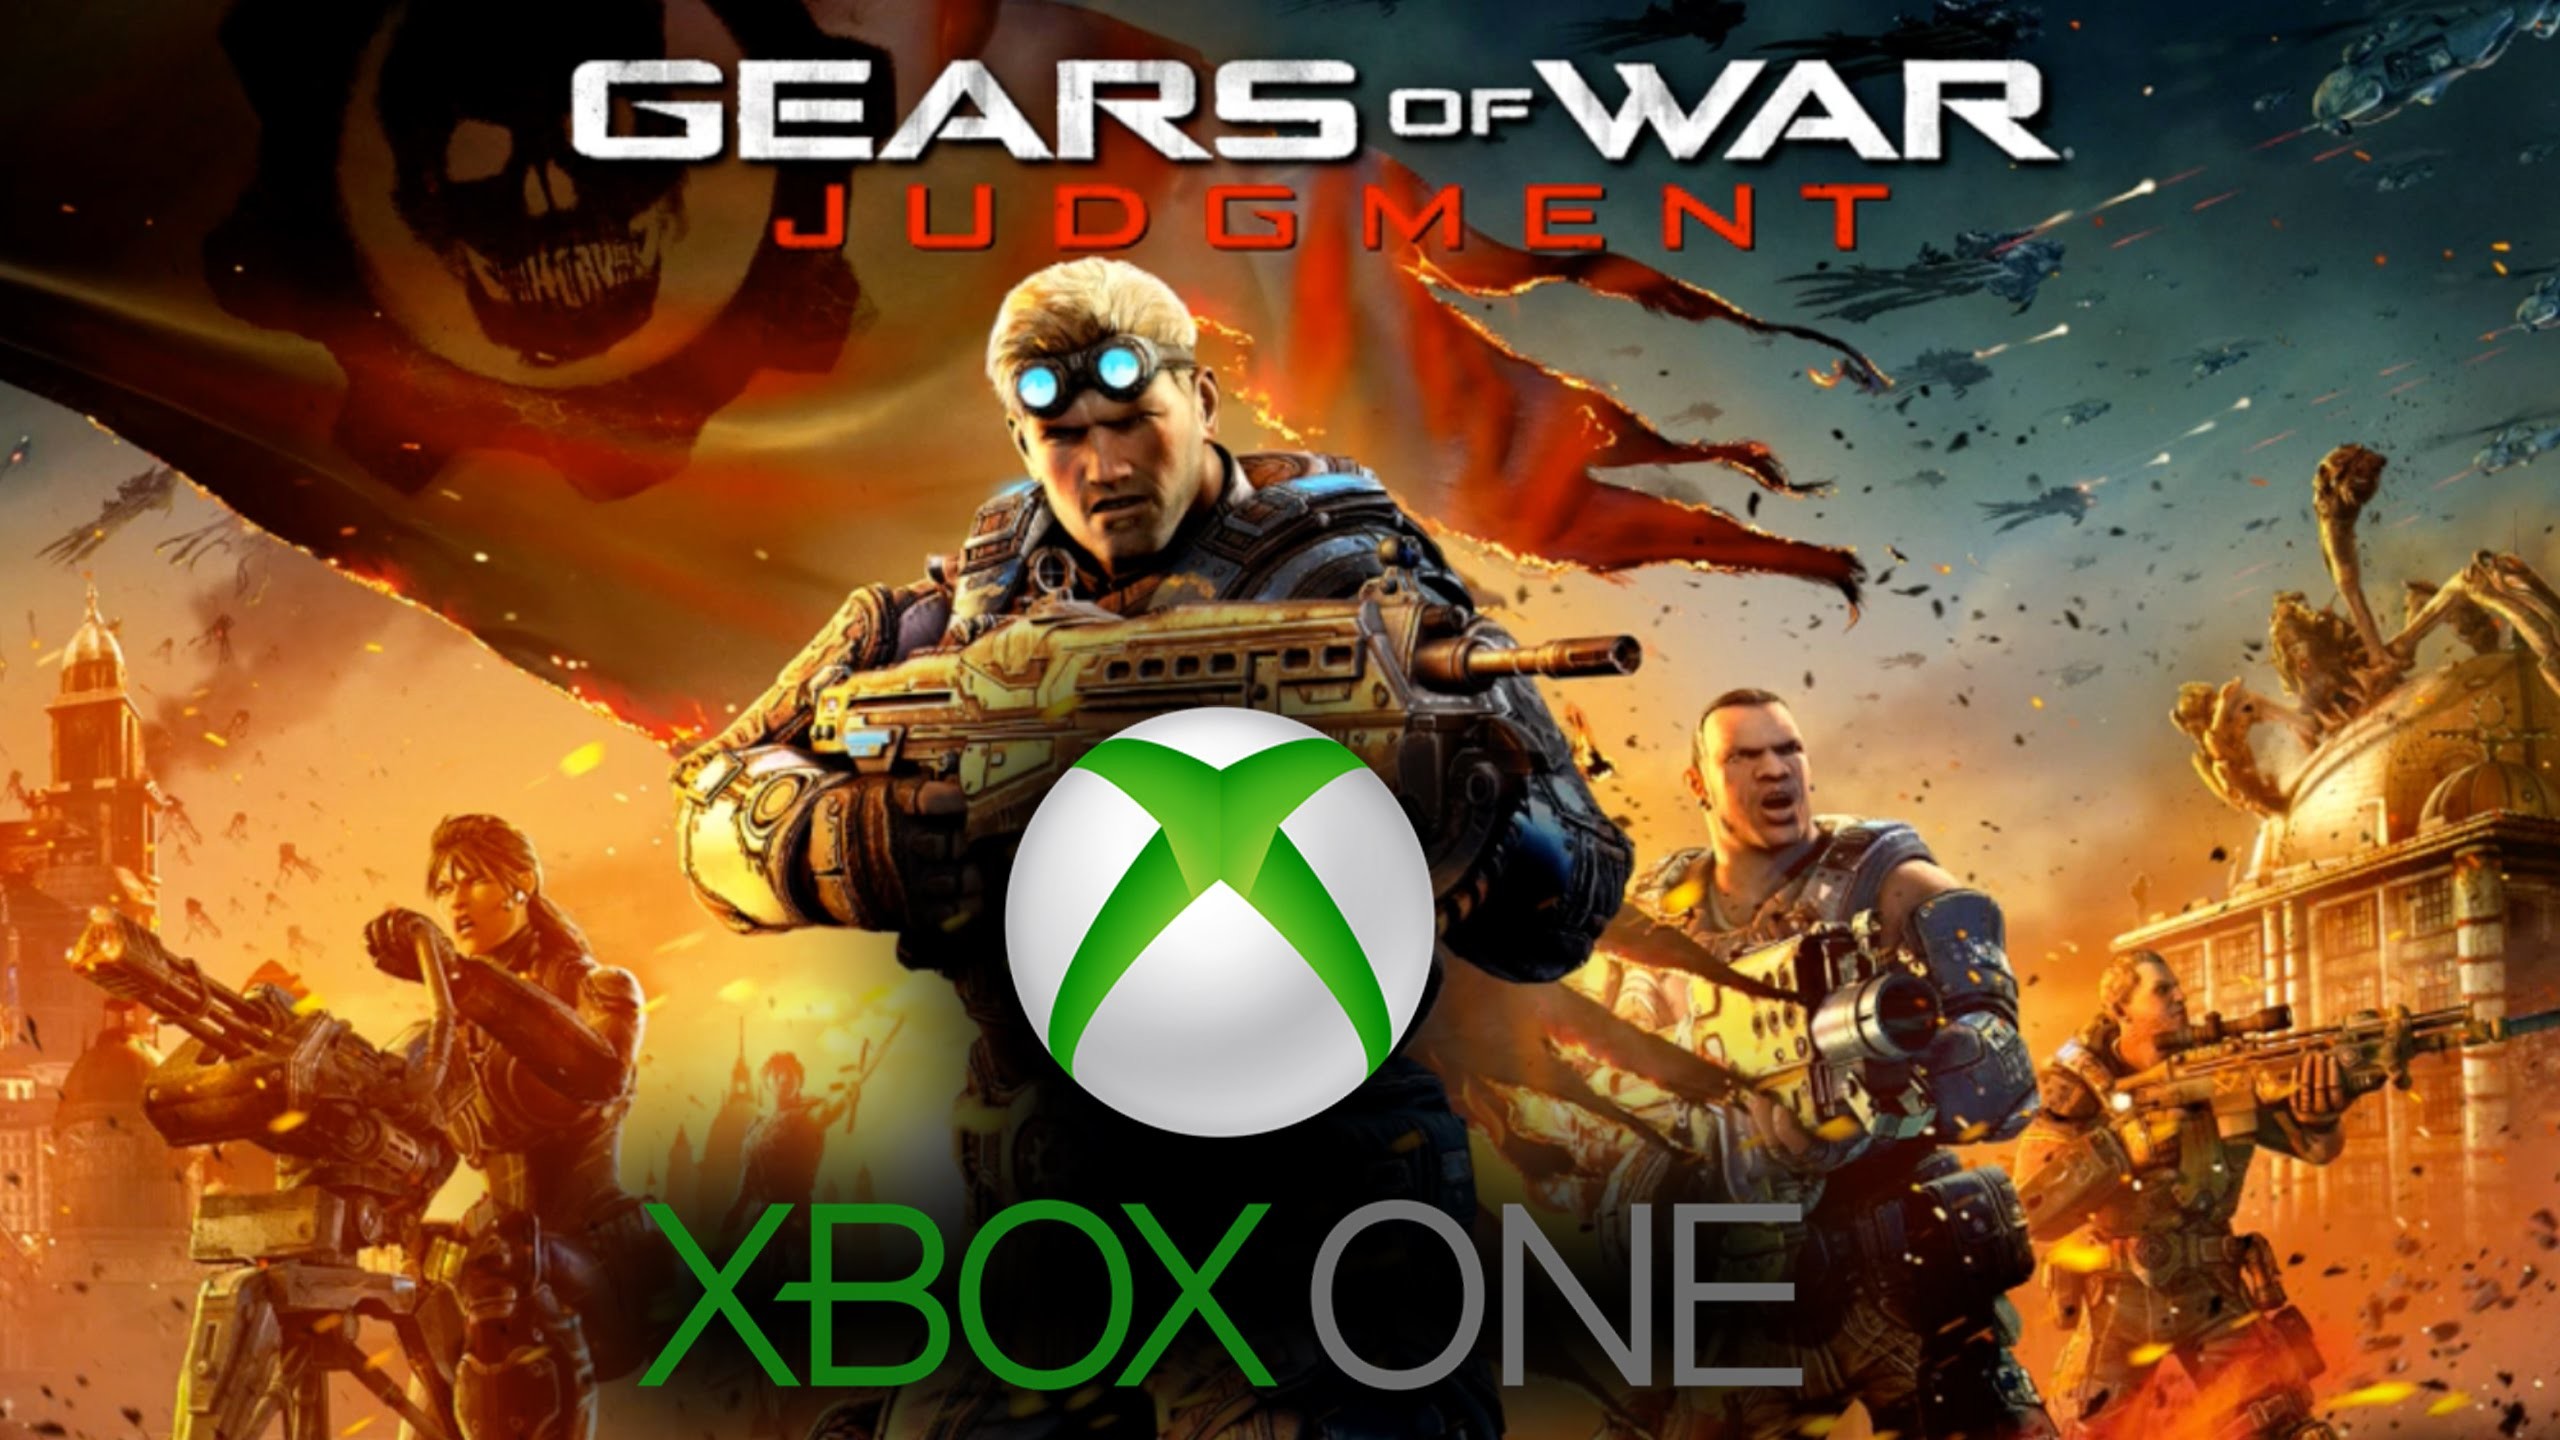 2560x1440 Gears of War Judgment Xbox One Backward Compatibility Gameplay